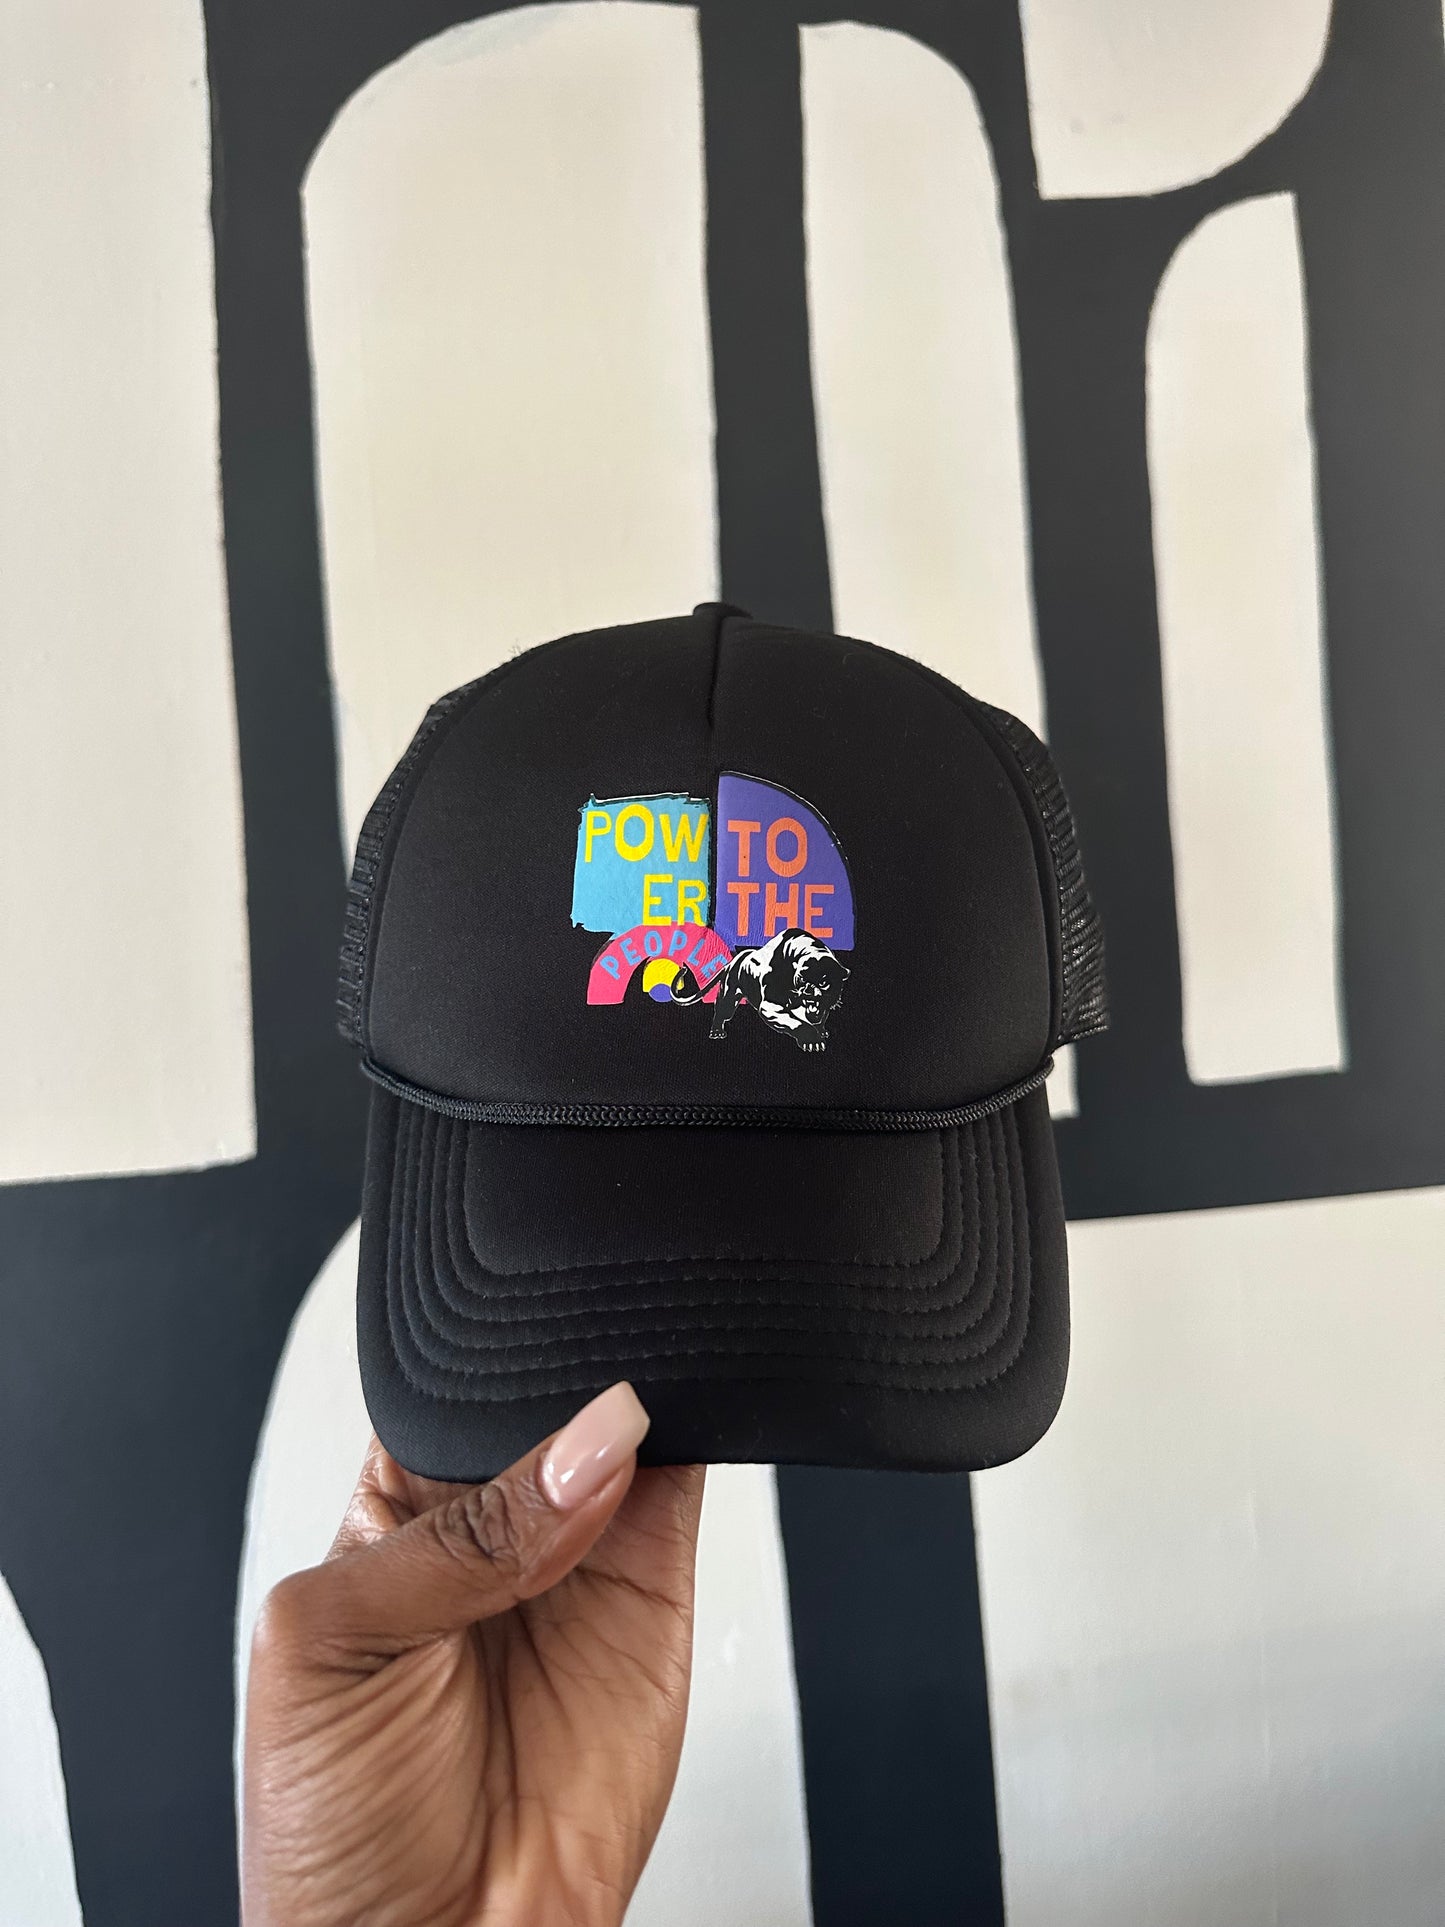 PTTP (power to the people) Trucker Hat